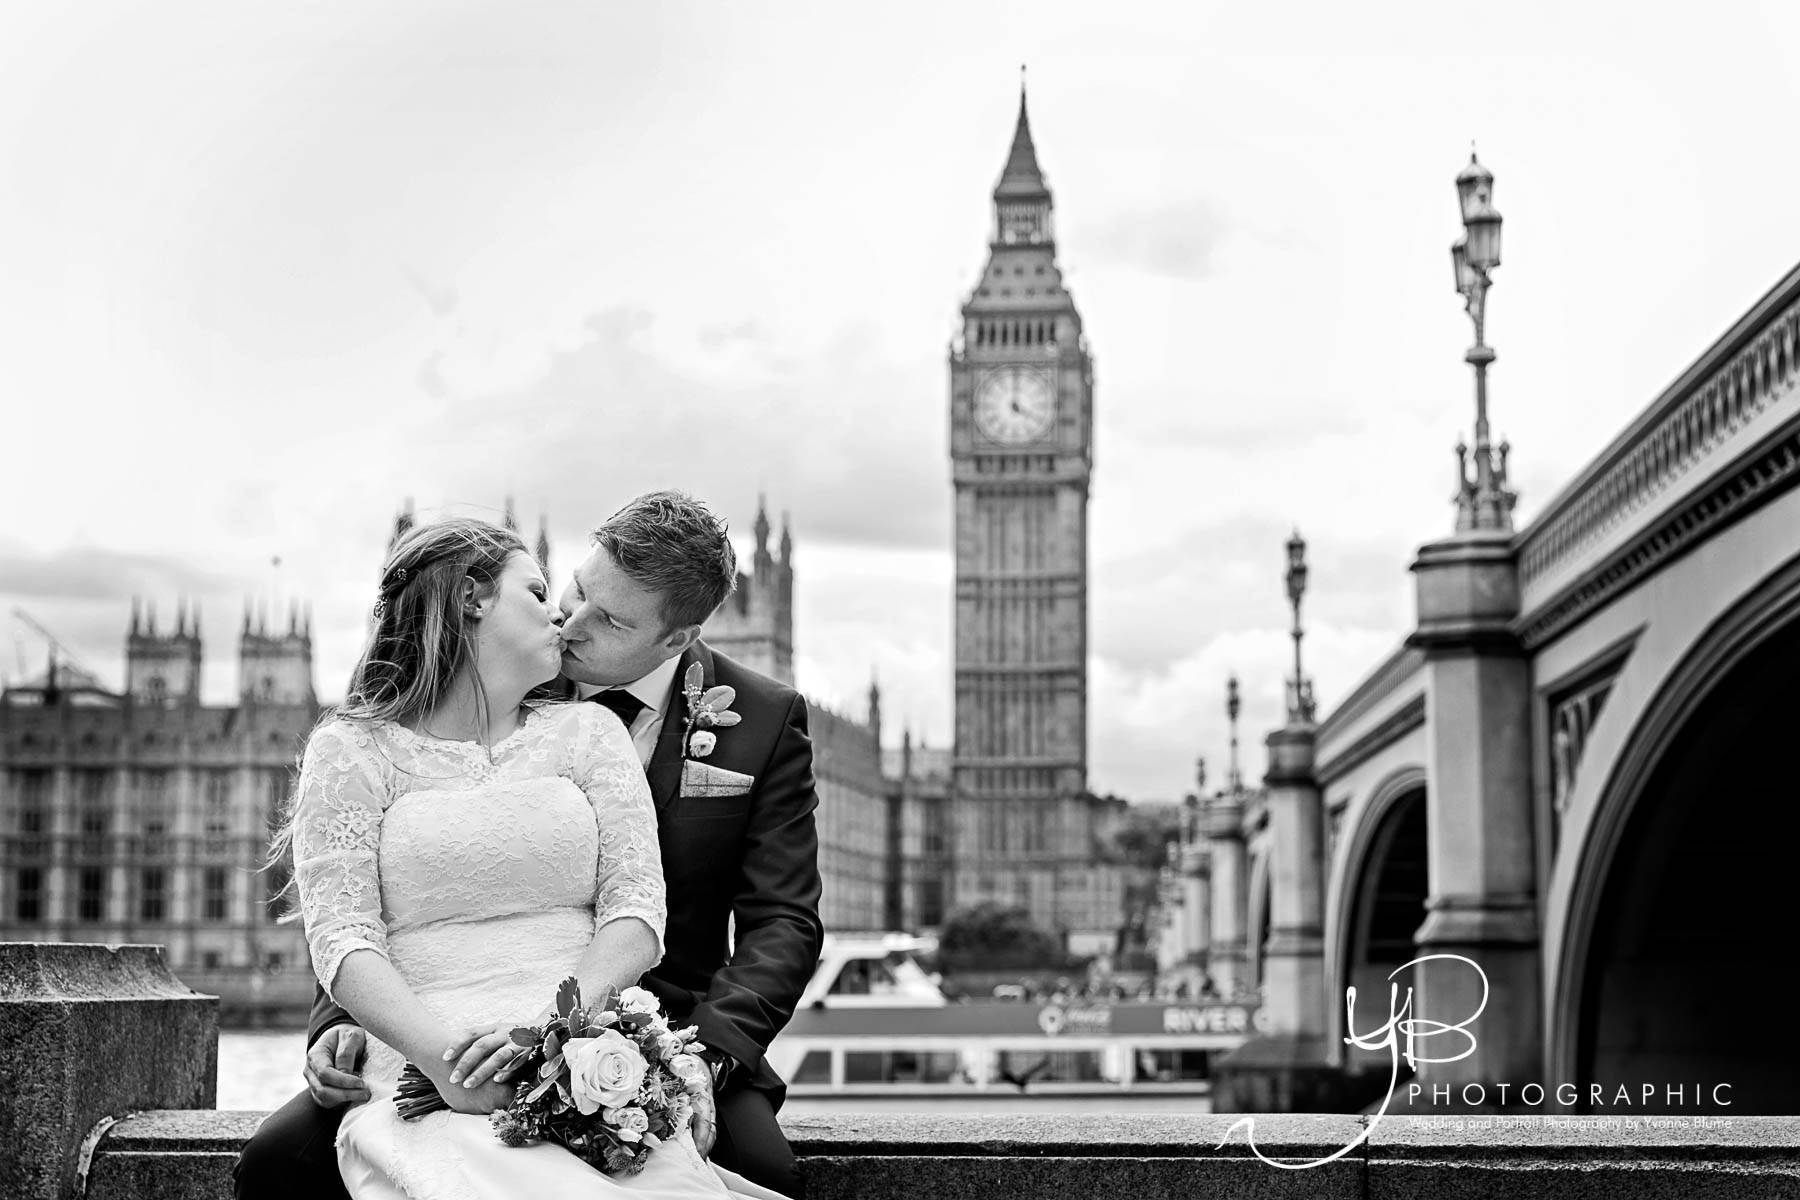 London Landmarks wedding portraits featuring The Houses of Parliament and Big Ben